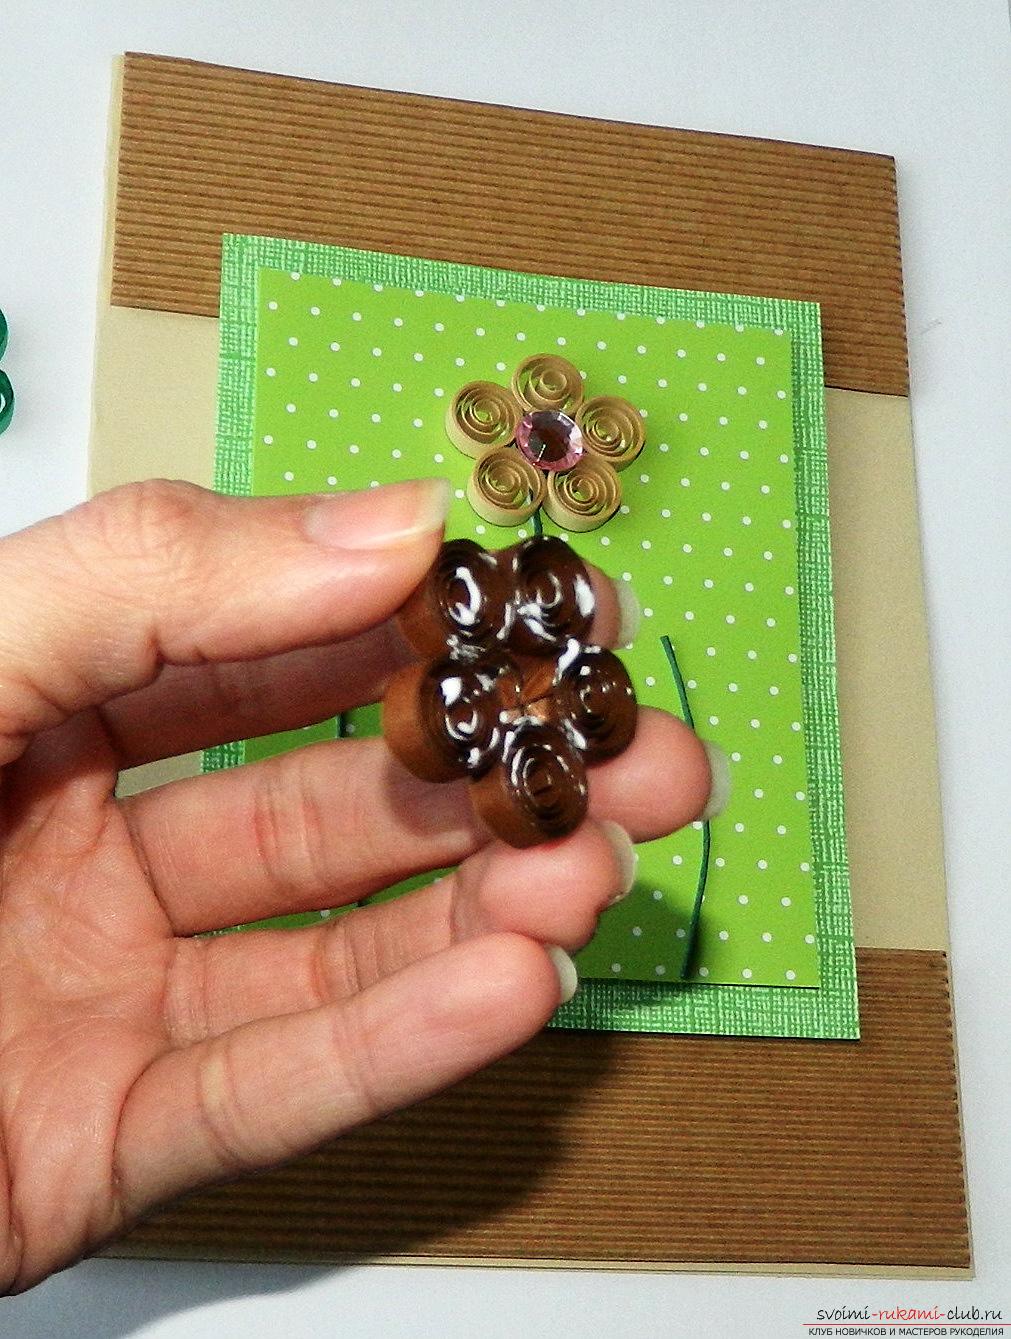 This master class will tell you how to make a birthday card with your own hands .. Photo №15